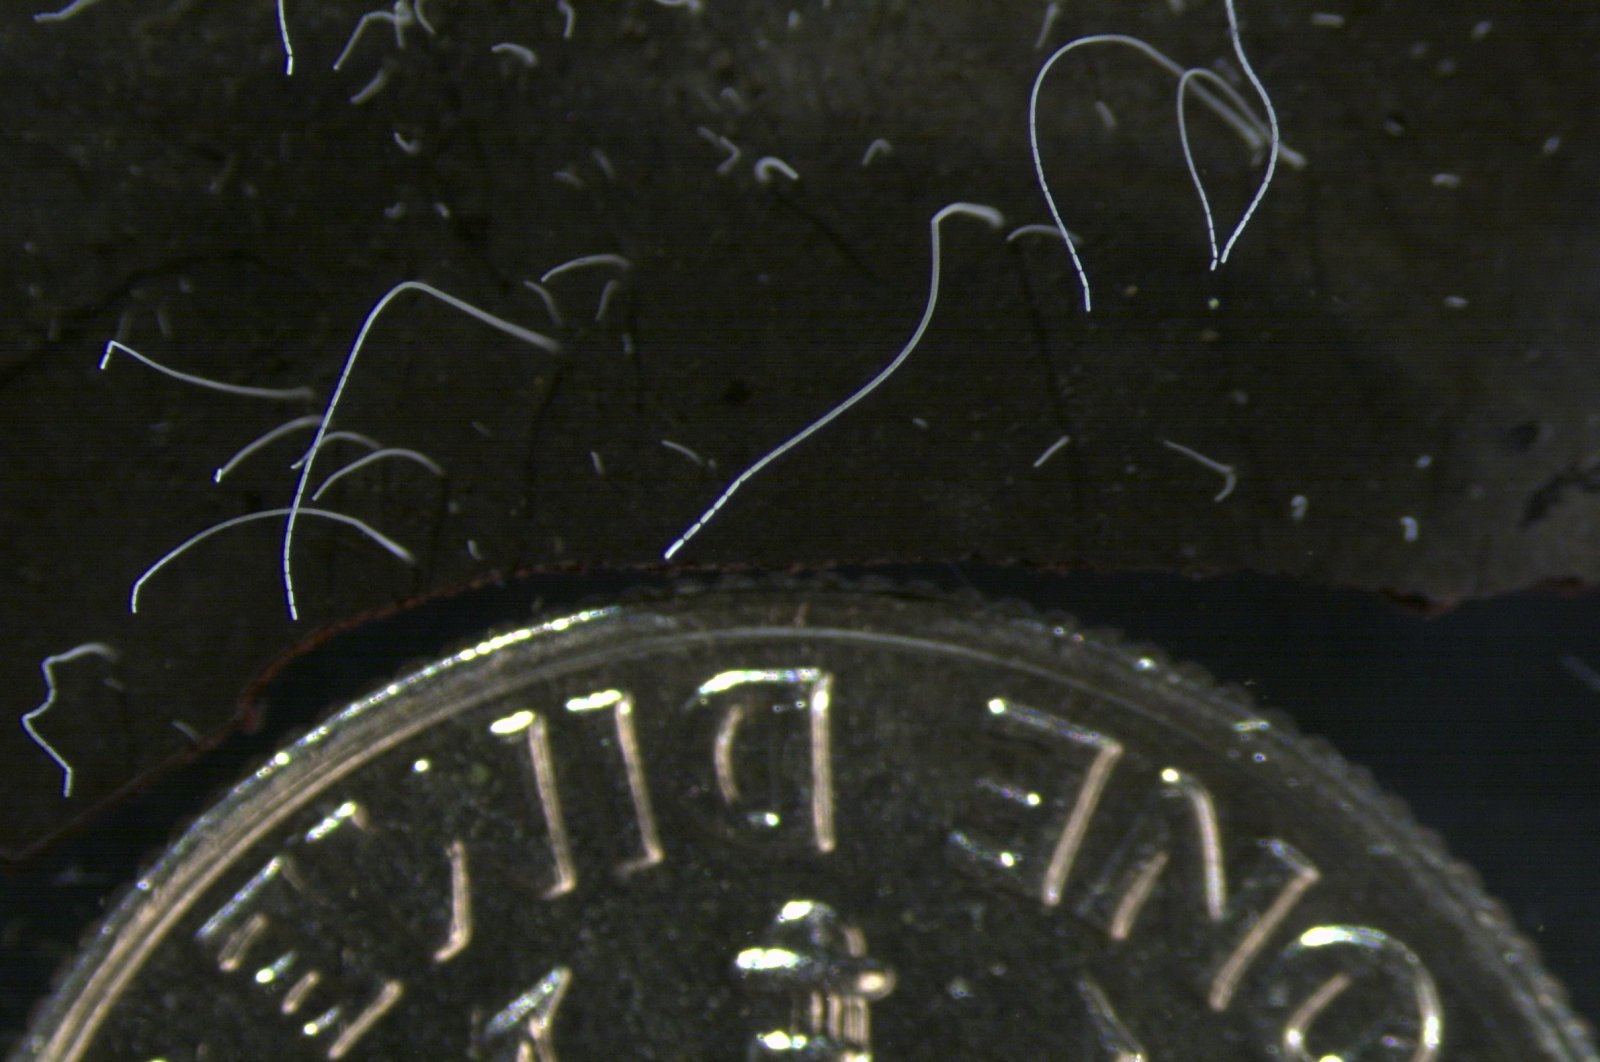 This microscope photo provided by the Lawrence Berkeley National Laboratory shows thin strands of Thiomargarita magnifica bacteria cells next to a U.S. dime coin, California, U.S., June 21, 2022. (AP Photo)